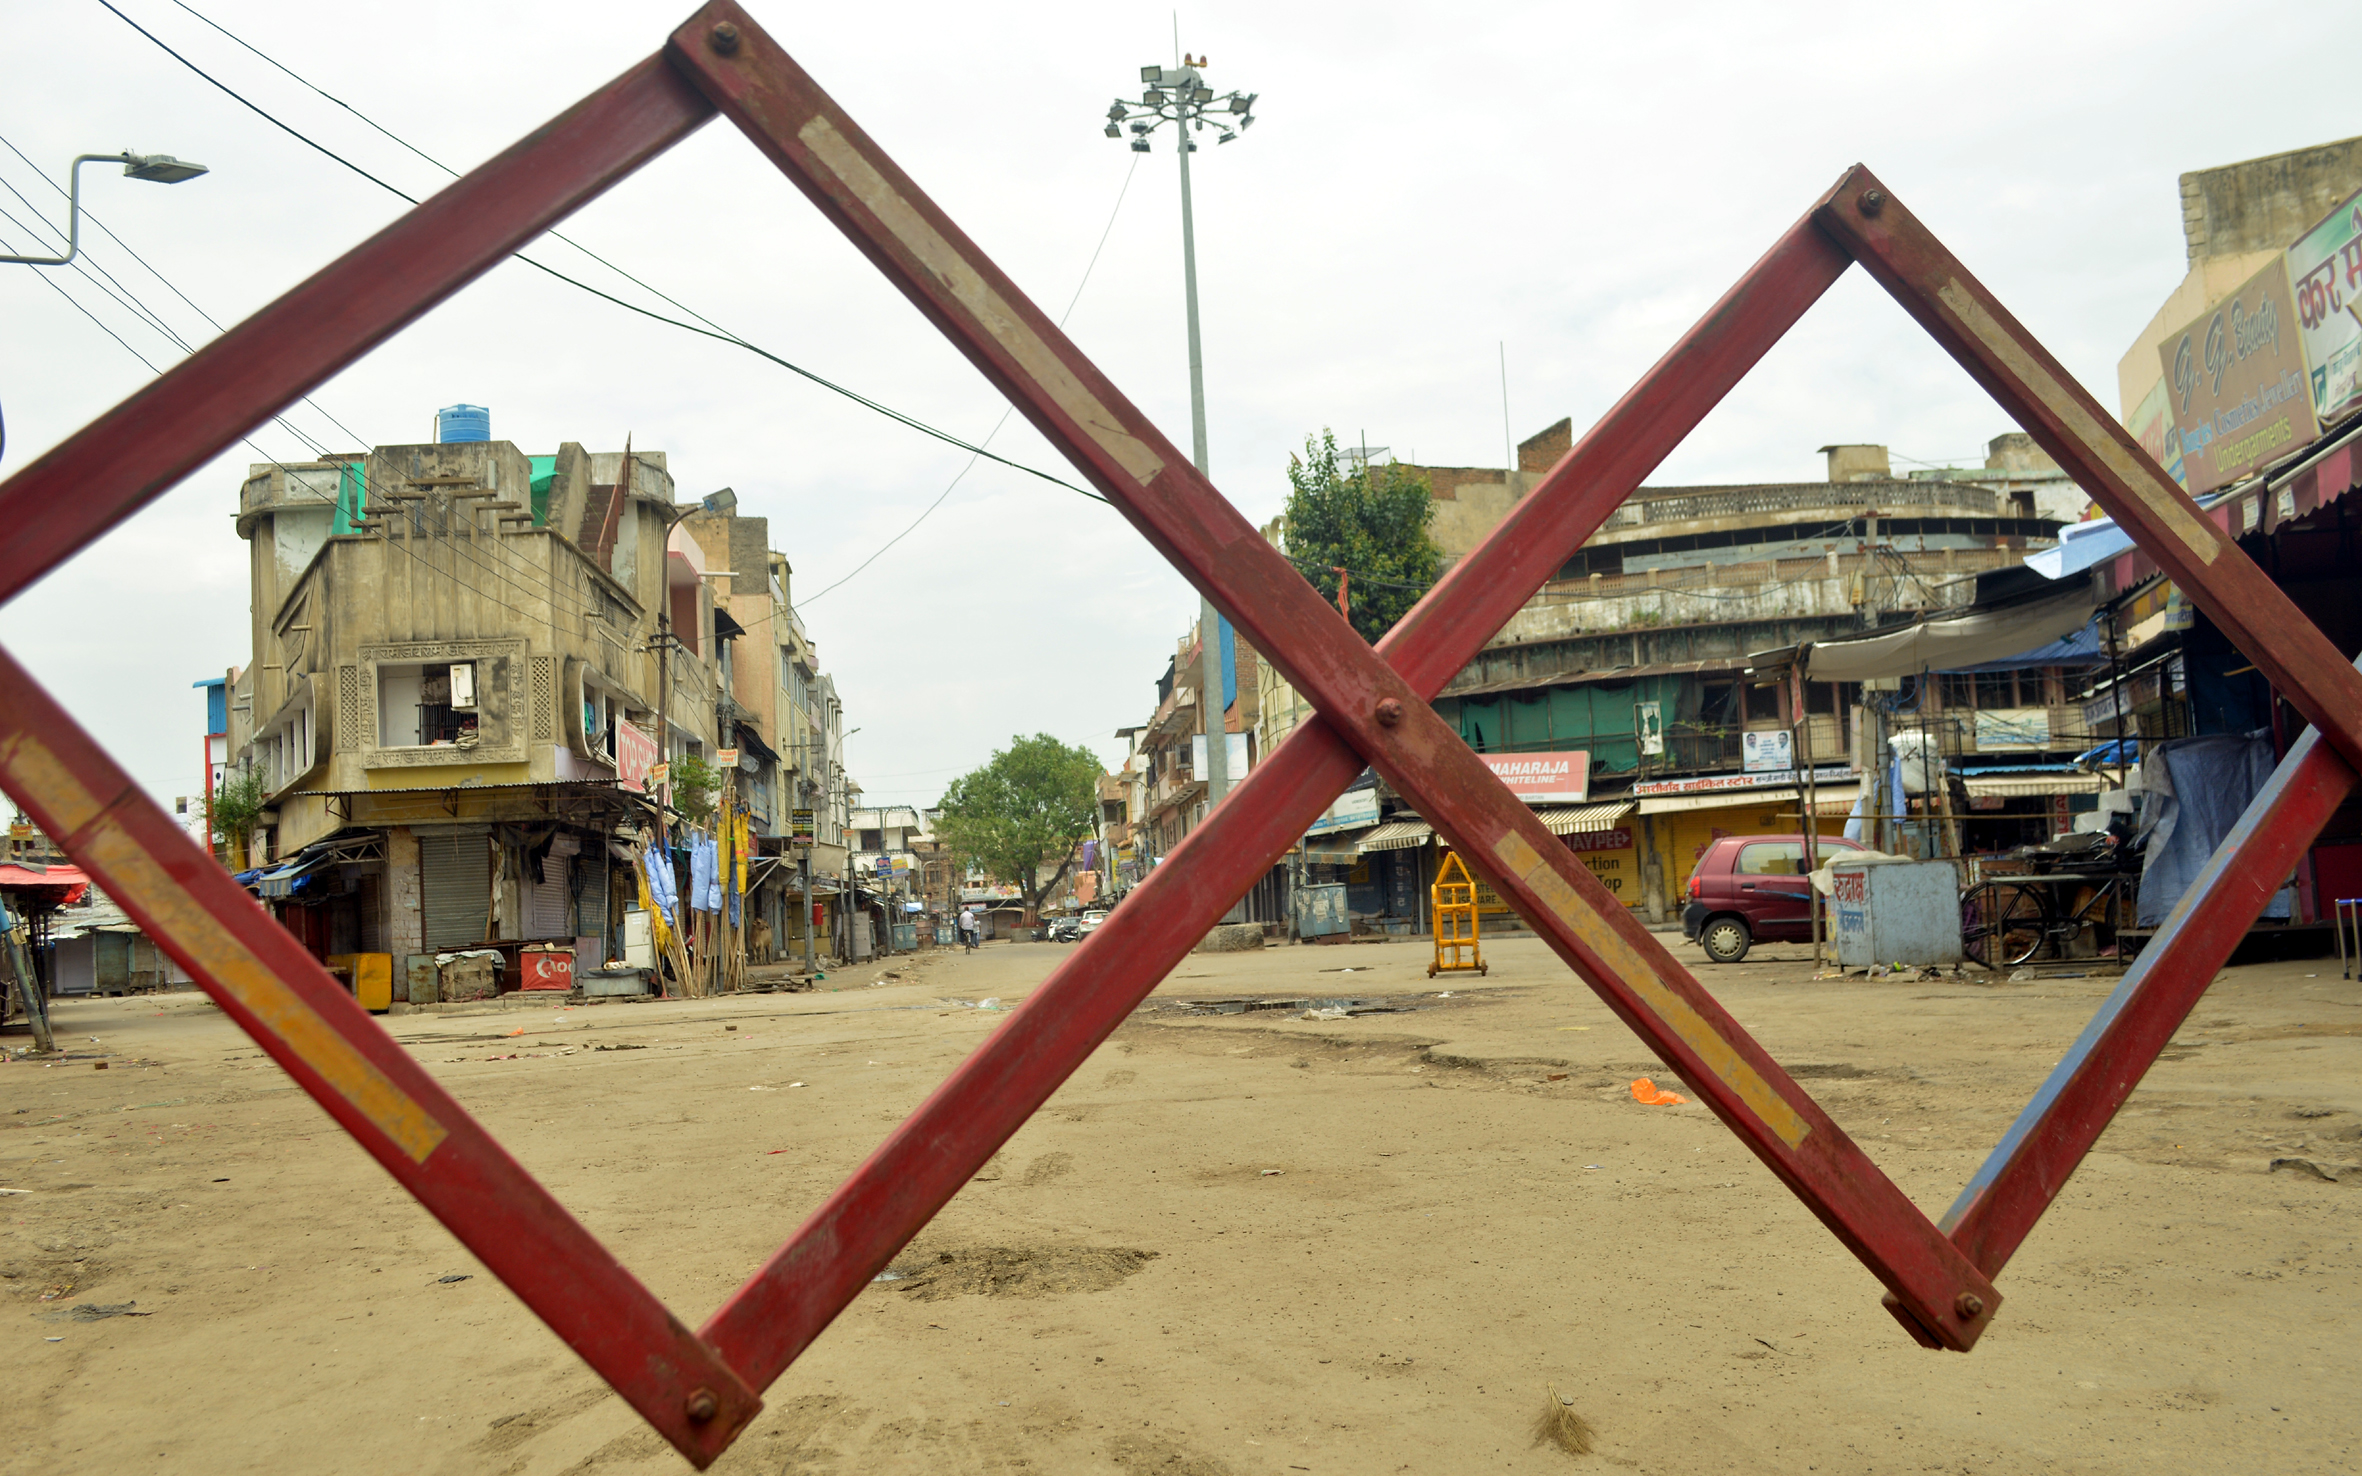 curfew in many areas in Kota